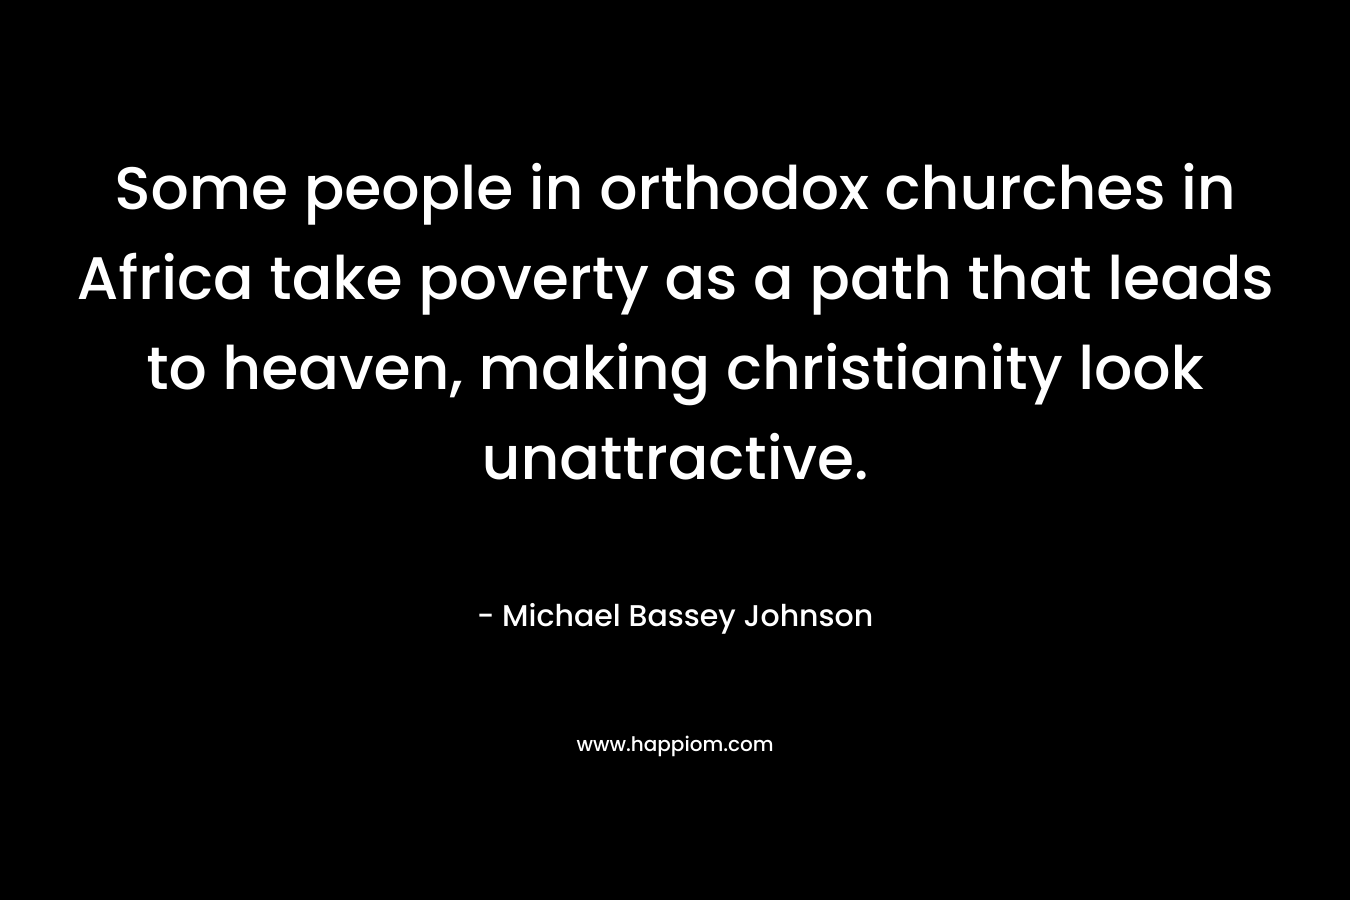 Some people in orthodox churches in Africa take poverty as a path that leads to heaven, making christianity look unattractive.